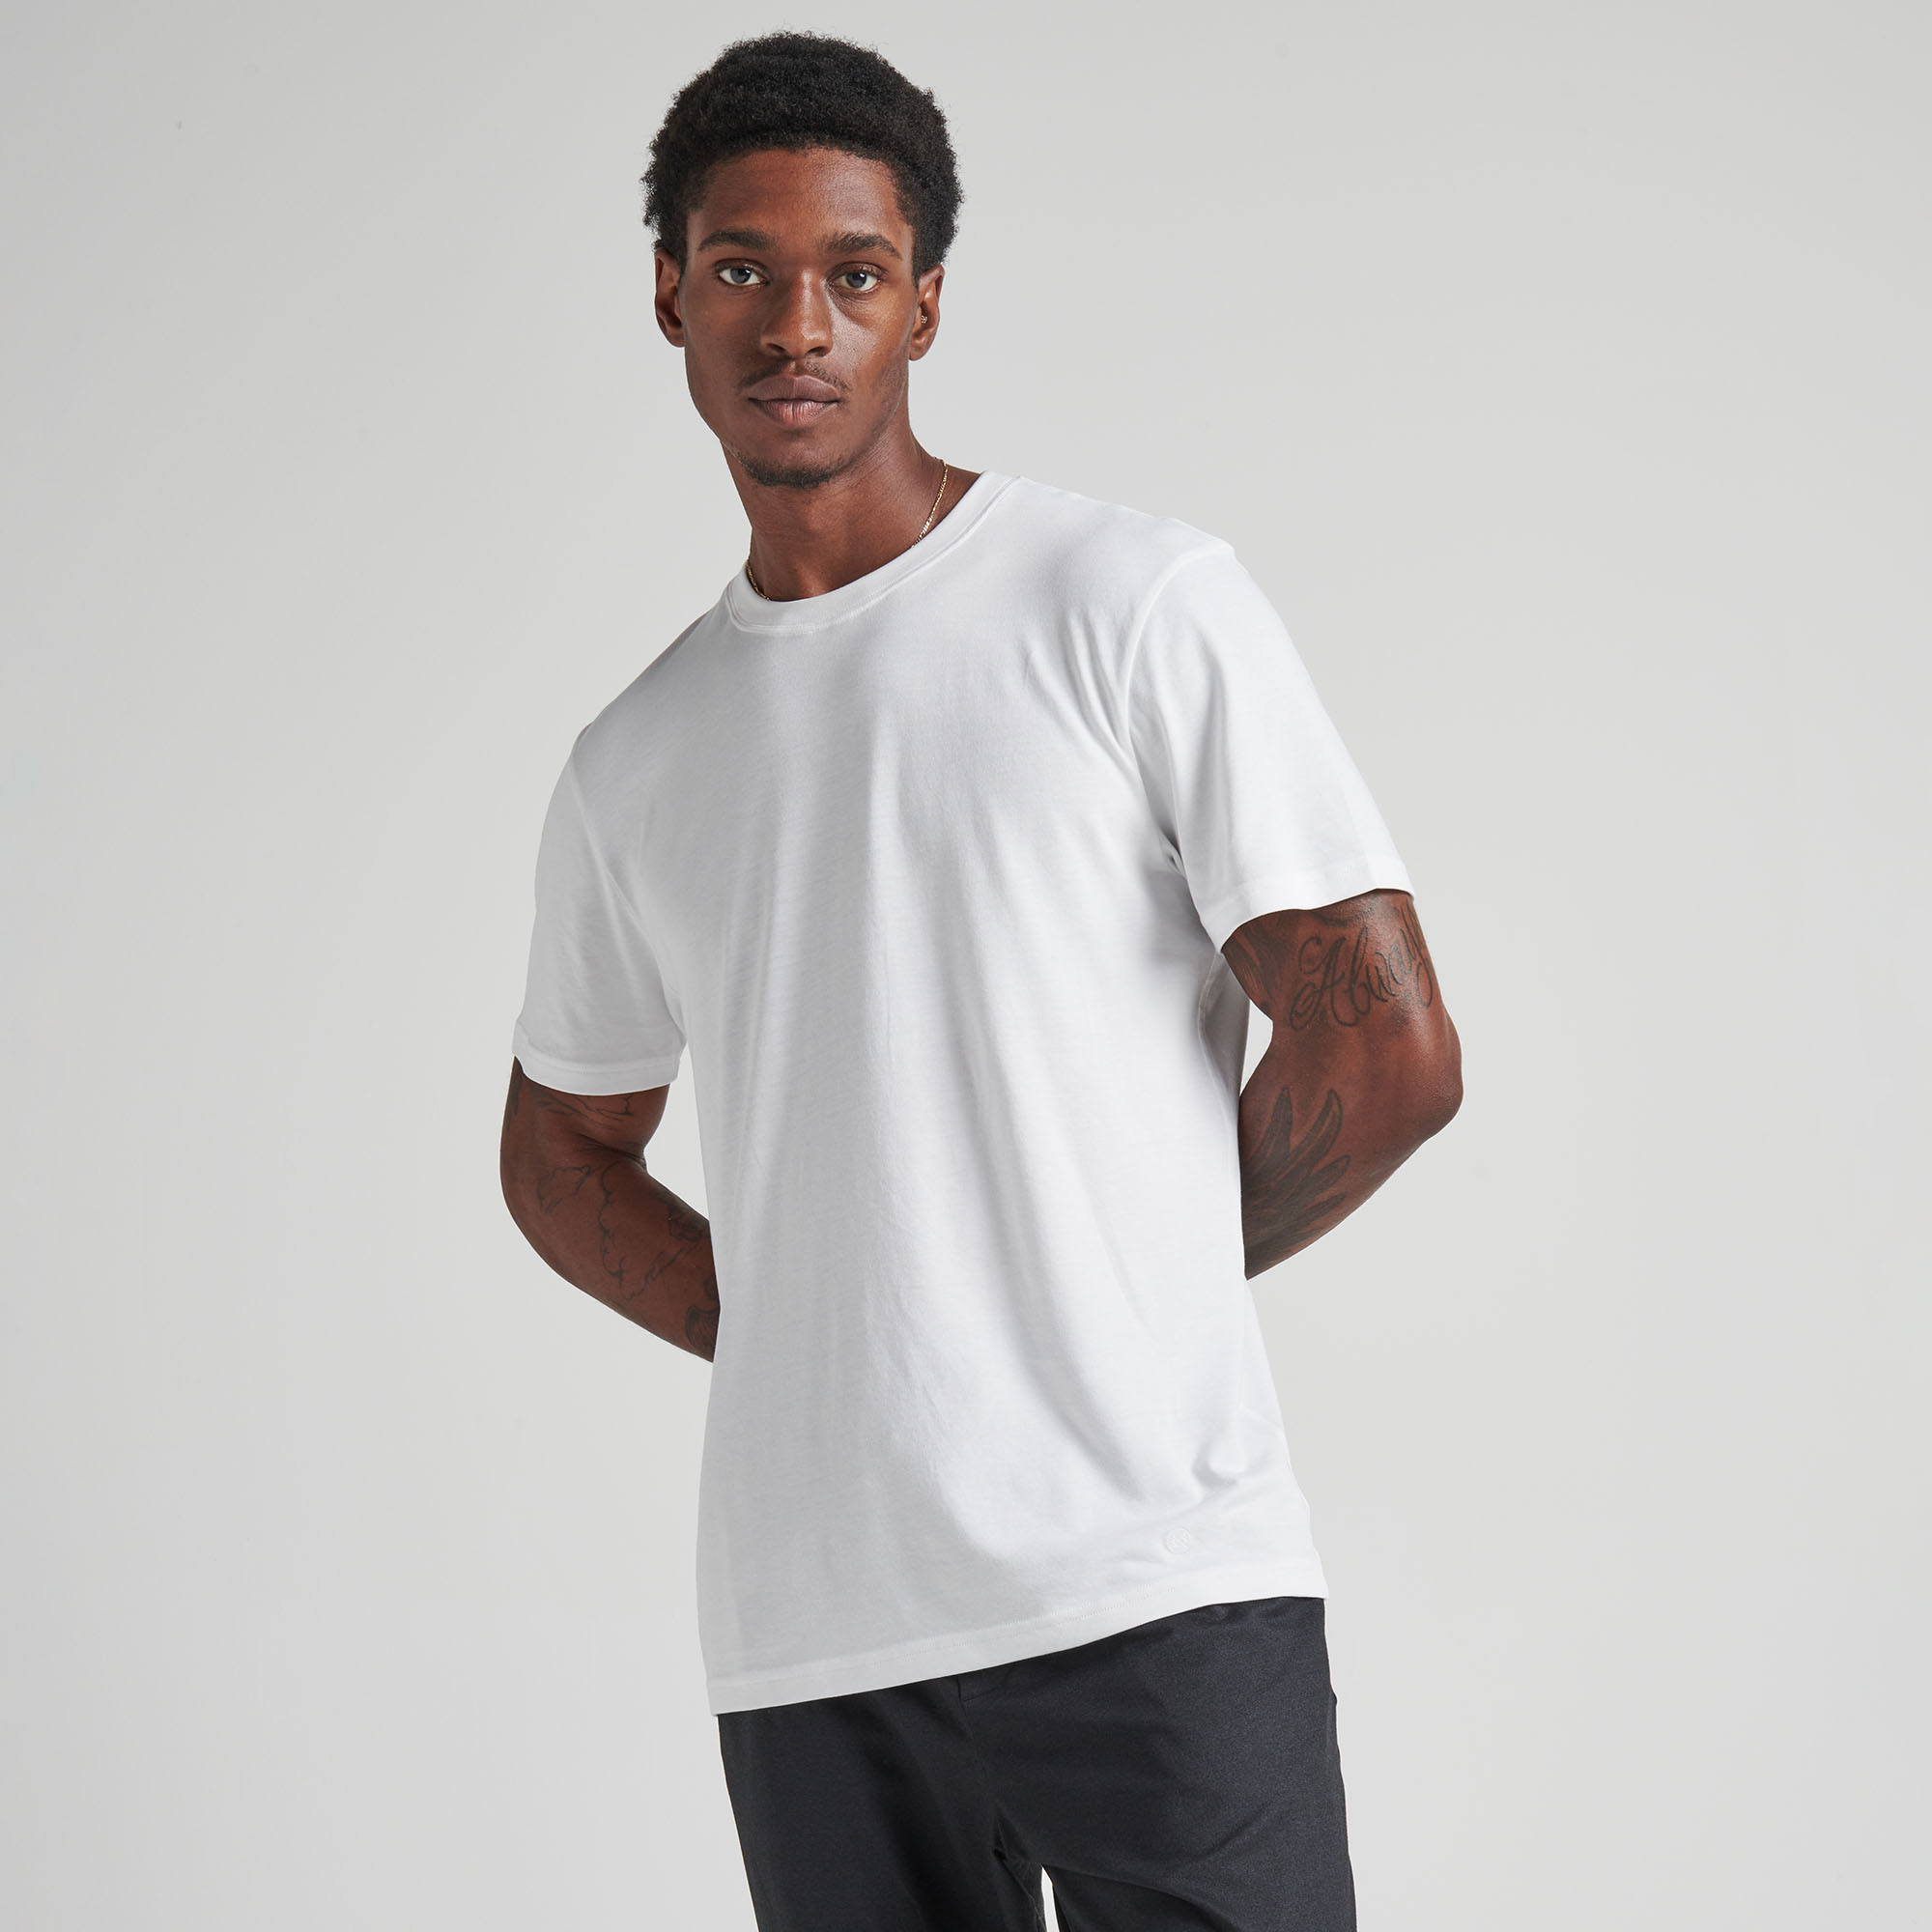 Stance T-Shirt With Butter Blend™ | Stance